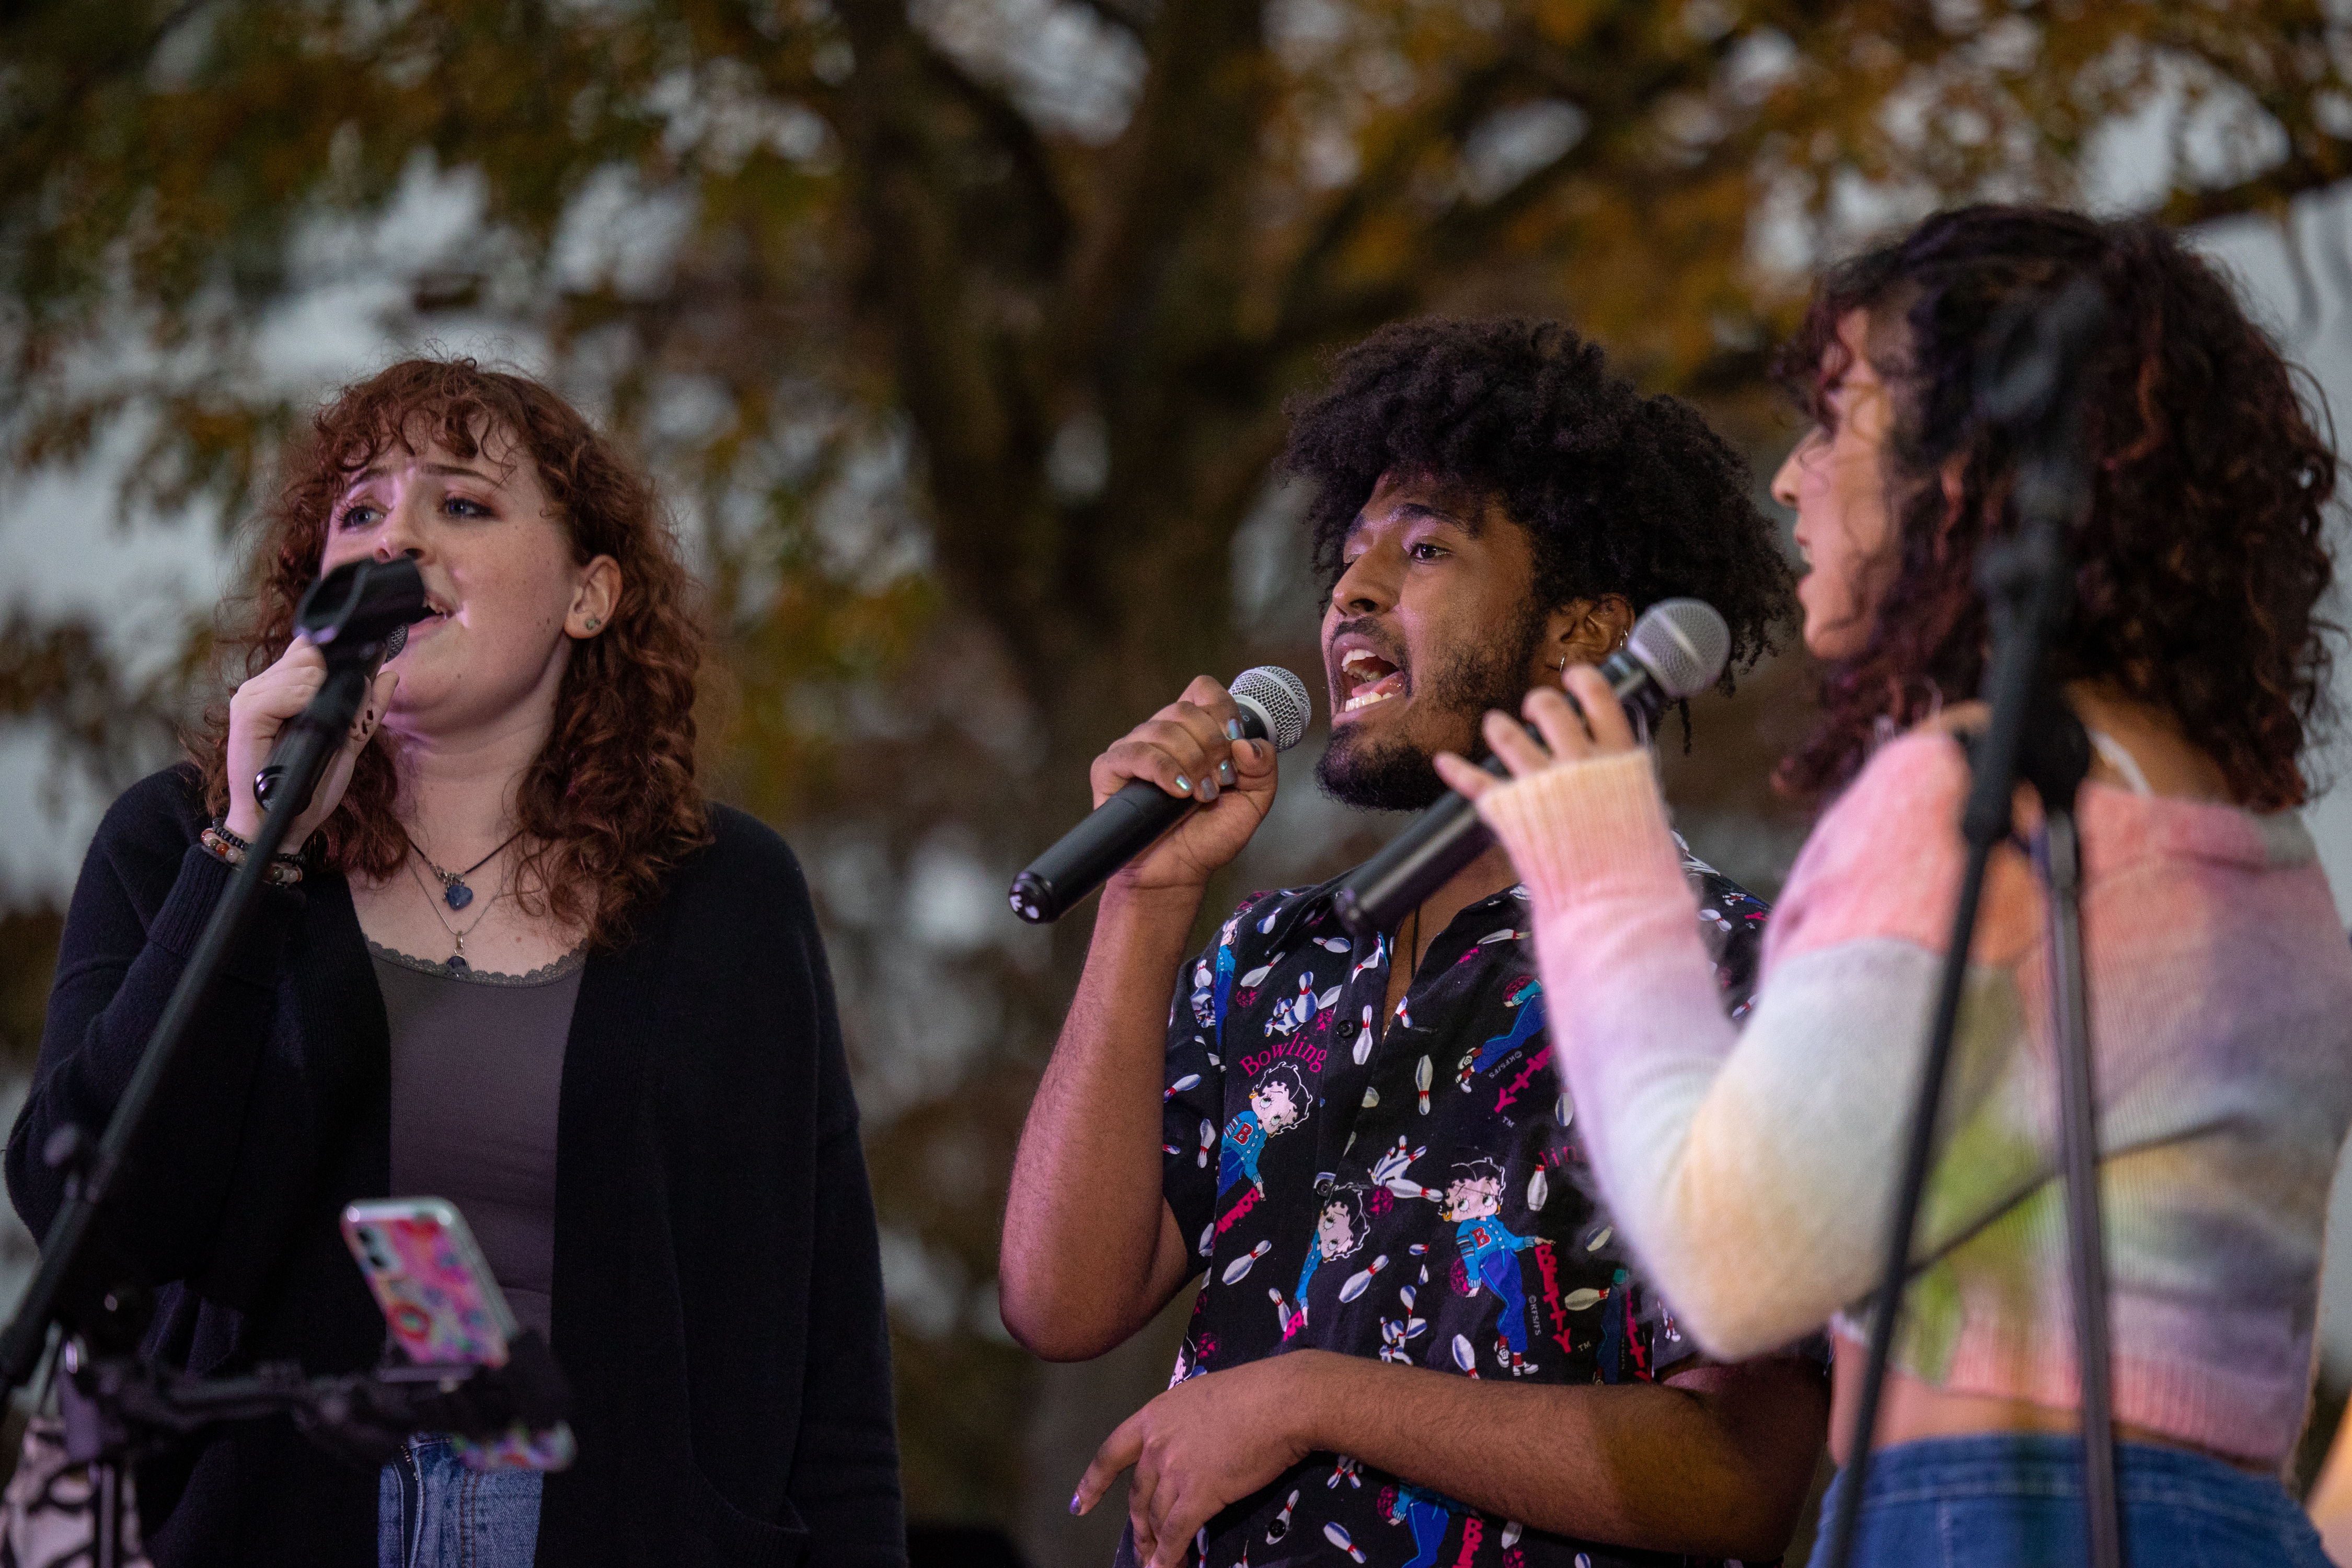 3 students holding microphones and singing outside in fall